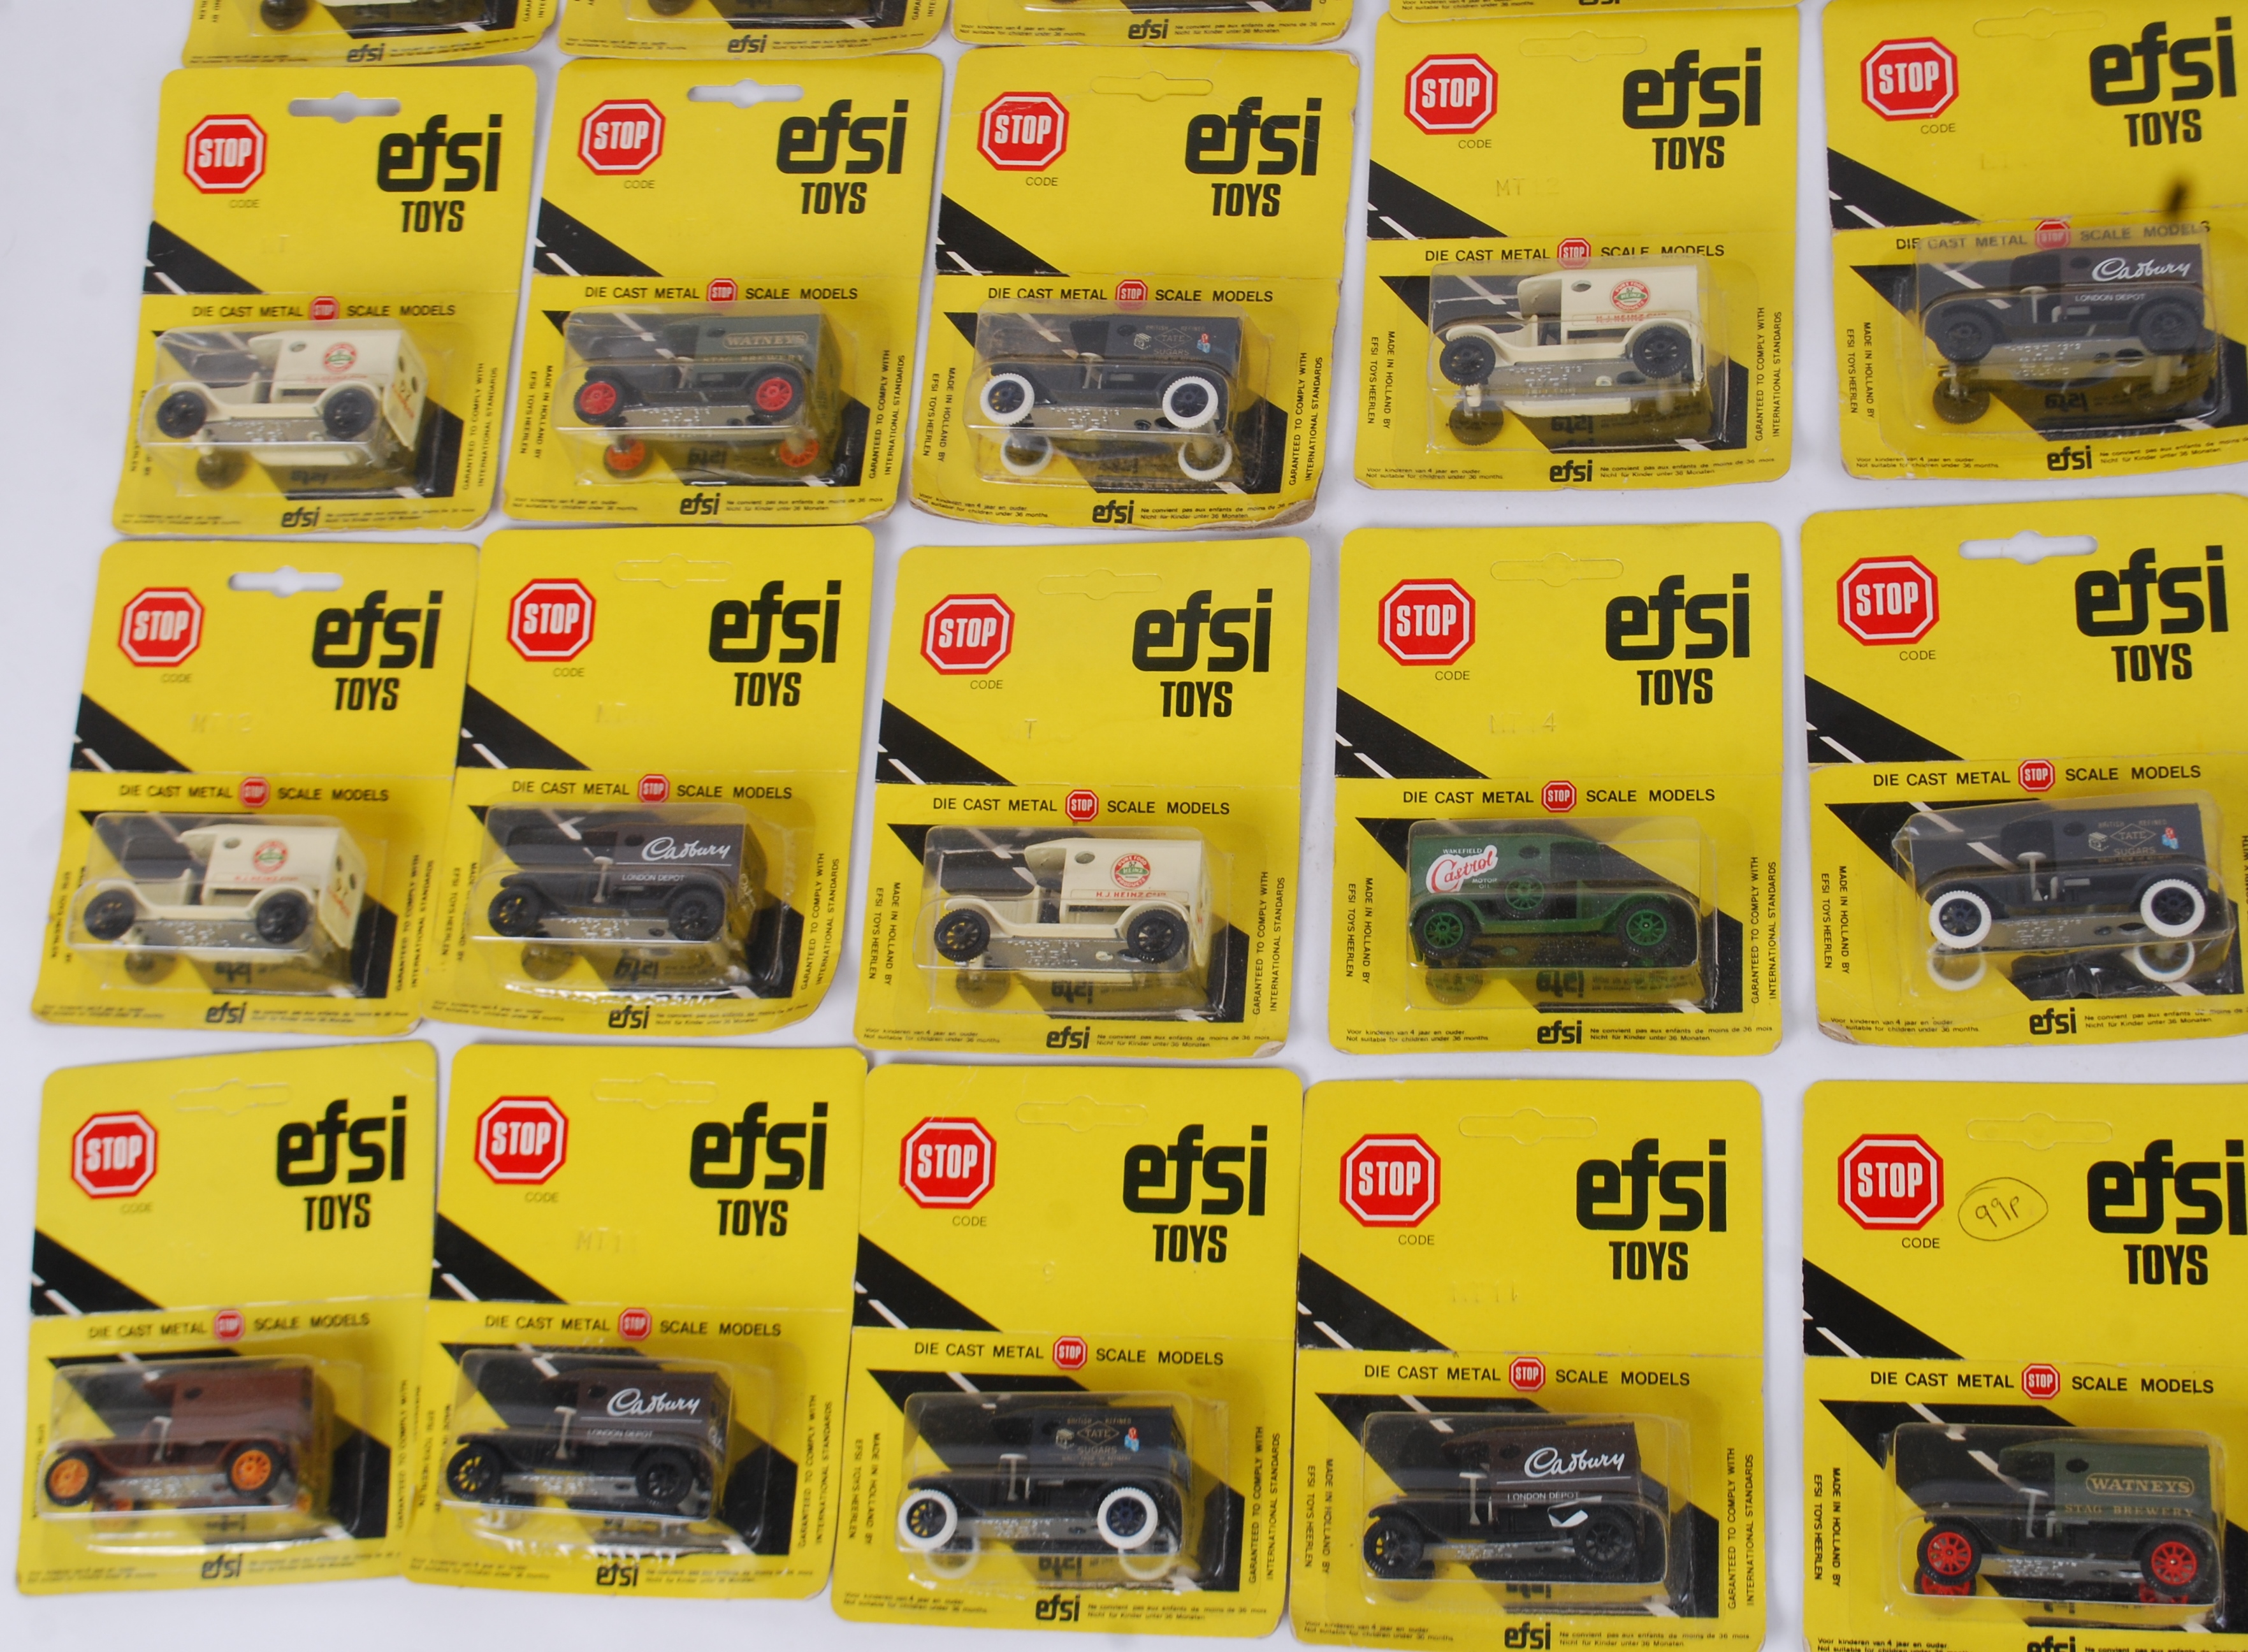 EFSI: A LARGE collection of vintage EFSI Toys diecast model cars. - Image 5 of 5